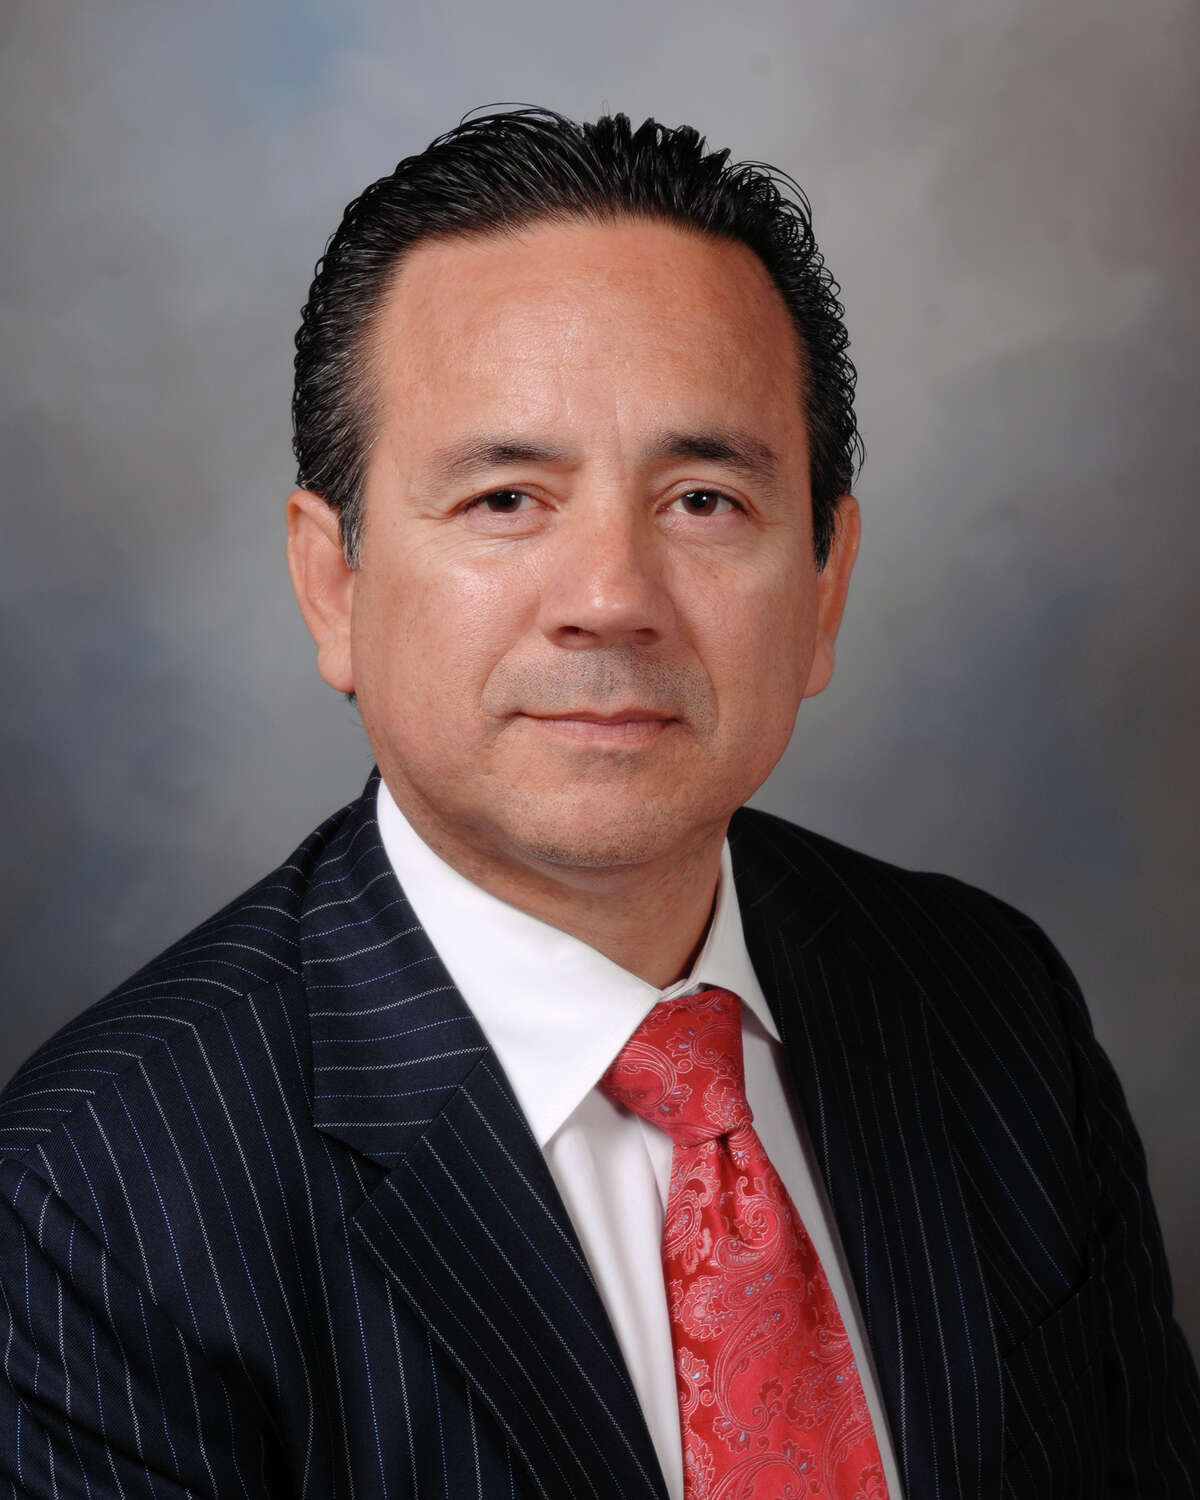 State Senator Carlos I. Uresti, a leader for Senate District 19 and the State of Texas.